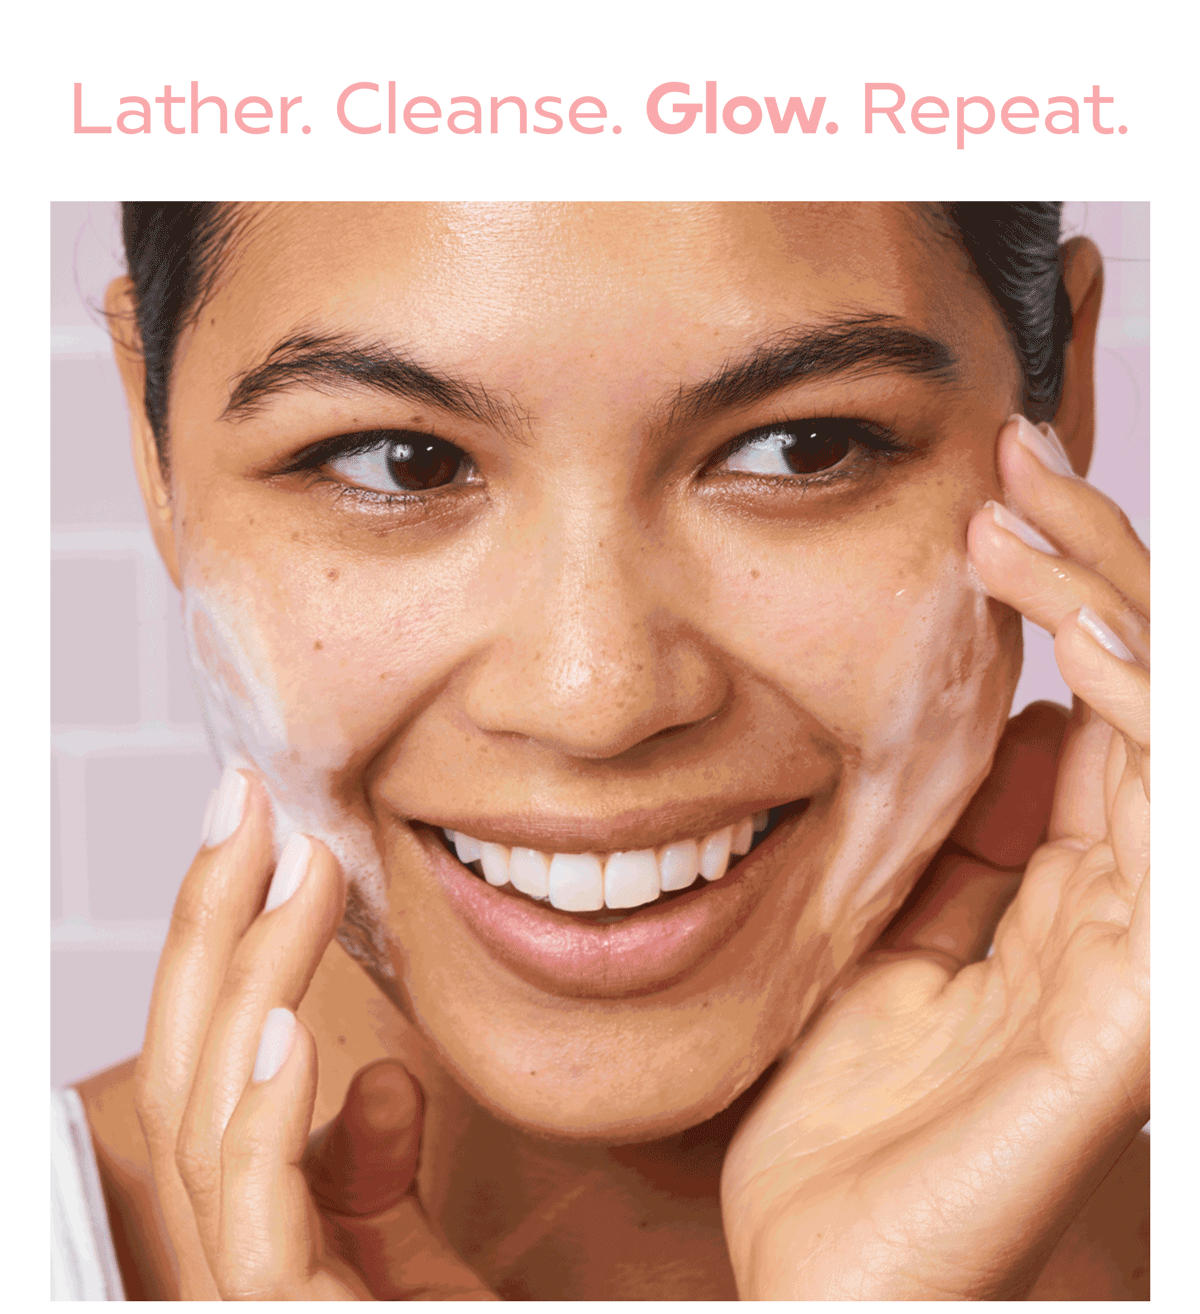 Lather. Cleanse. Glow. Repeat.